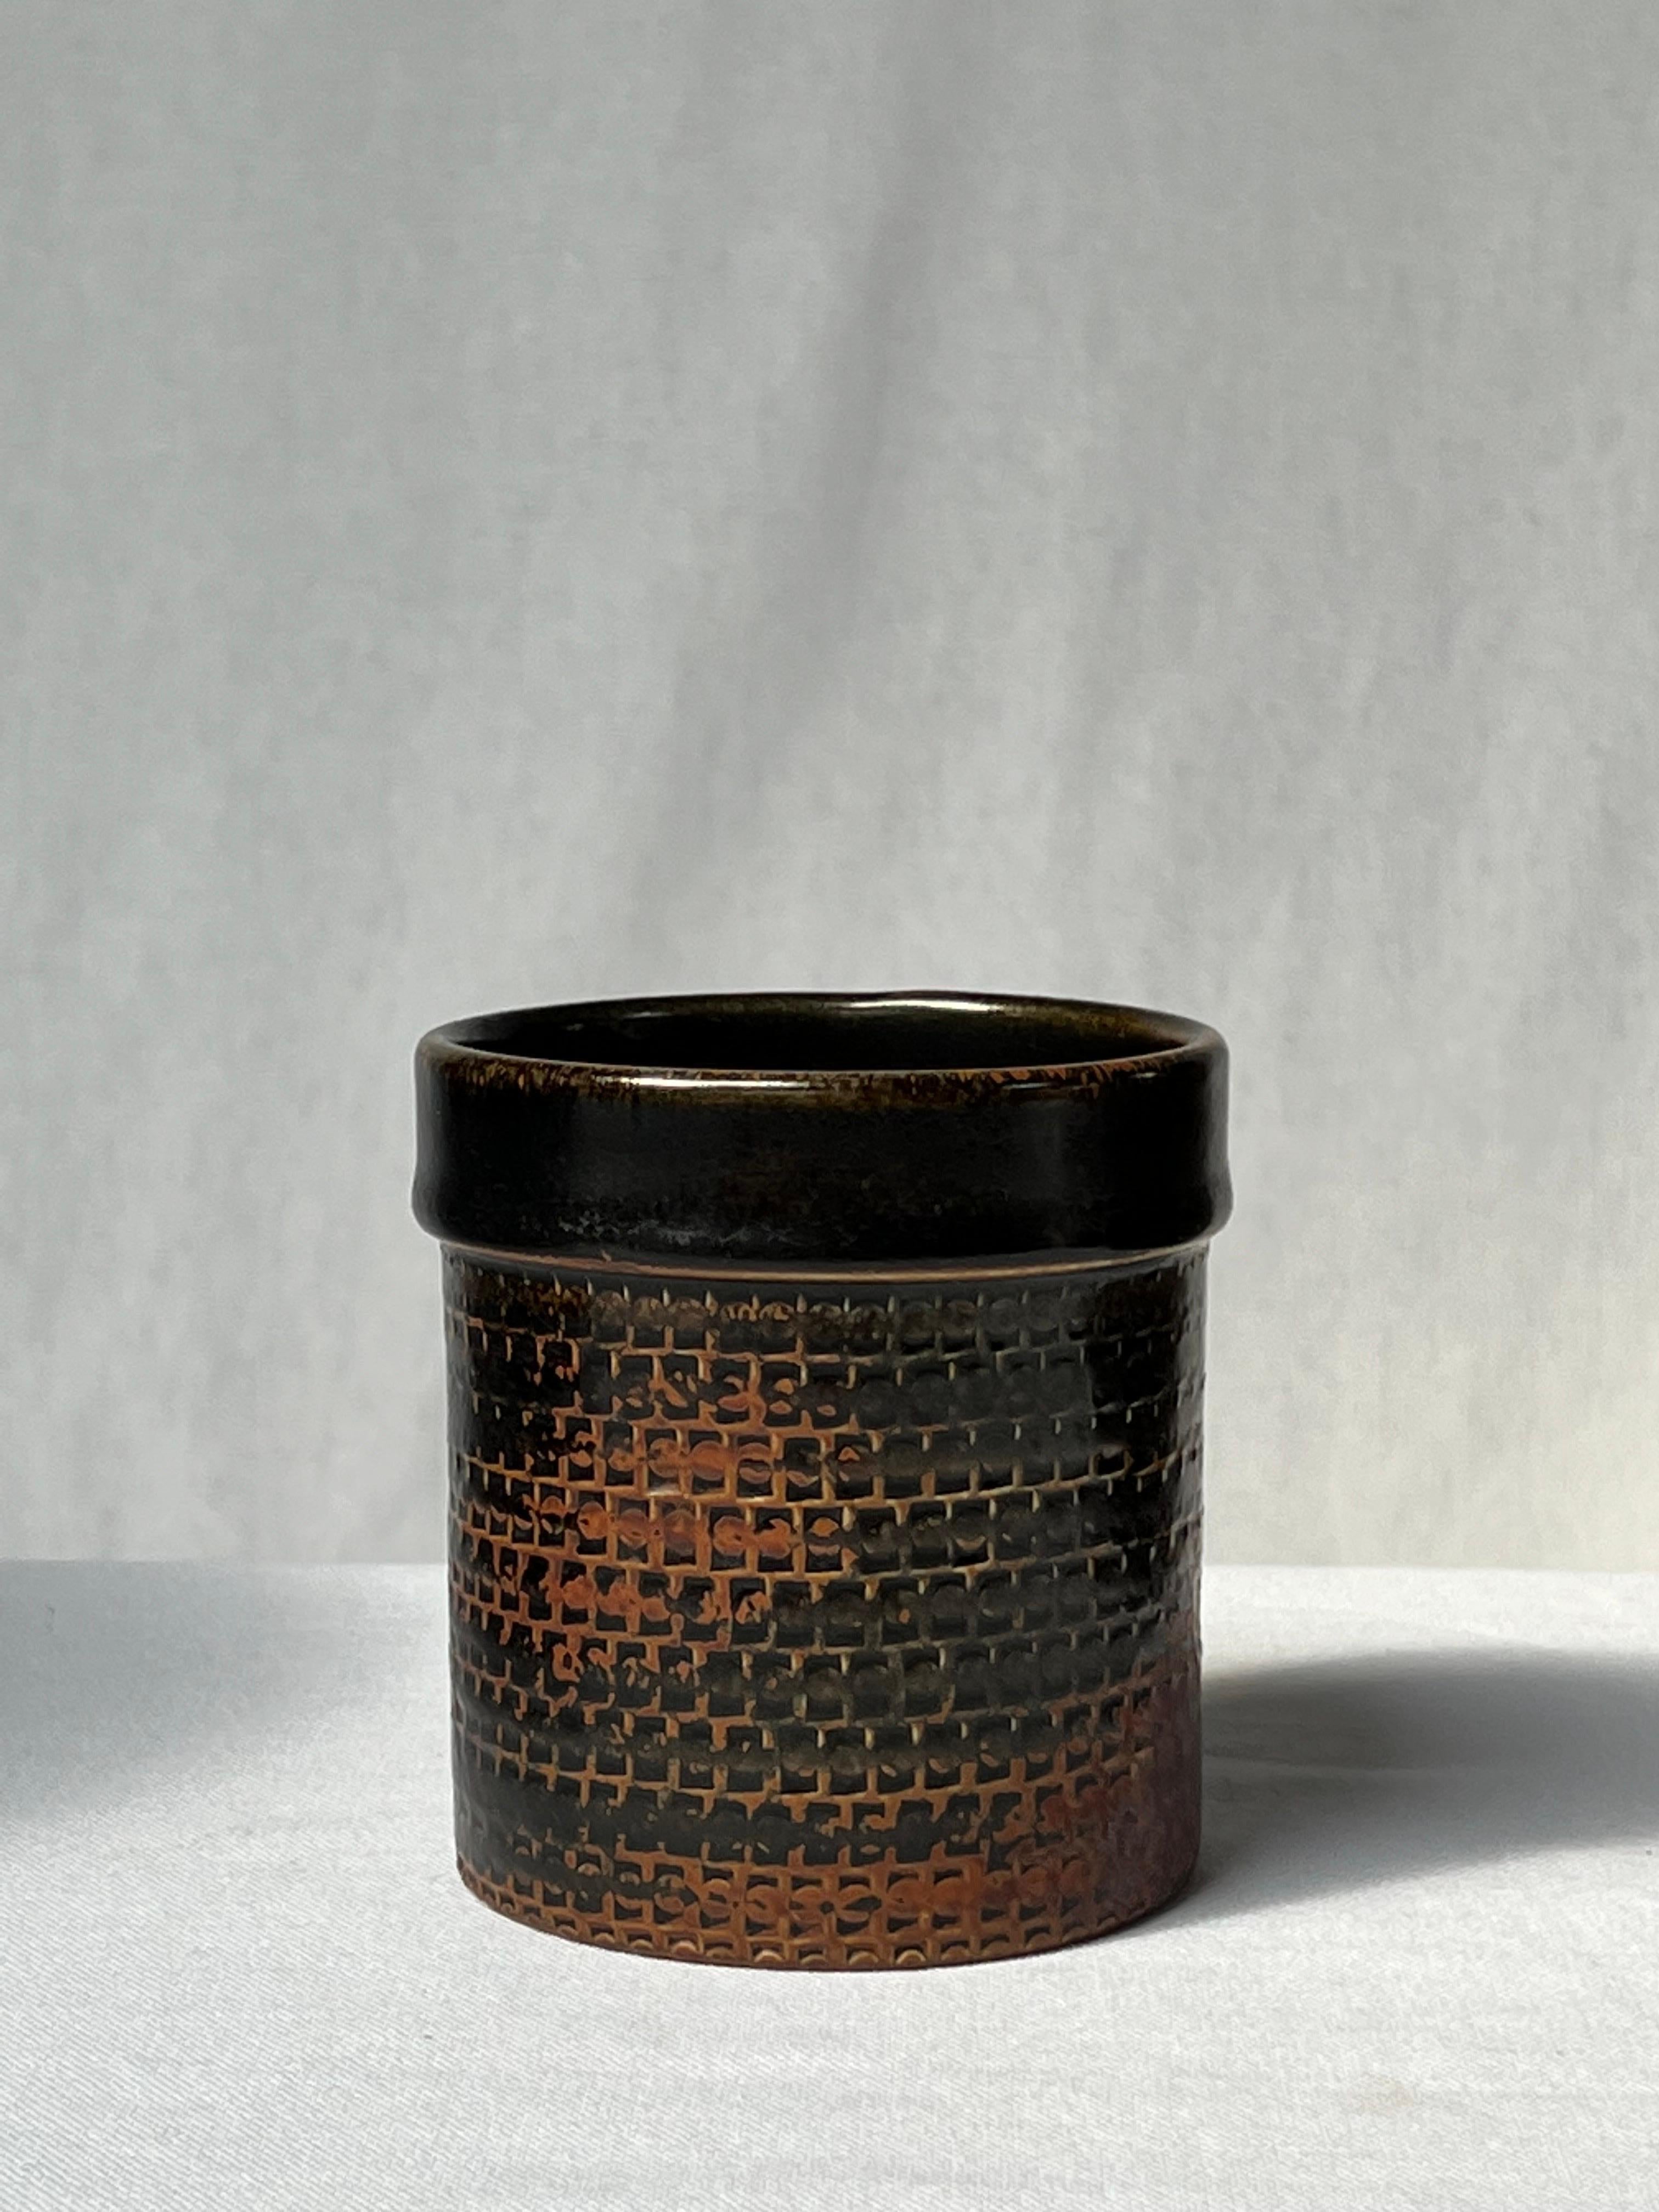 Black glazed vase by Swedish master ceramicist Stig Lindberg. From light brown on the edges to dark black. It is the Japanese tenmoku glaze also used by the ancient Chinese. Elegant details and nice pattern. Unique piece made by hand and signed by